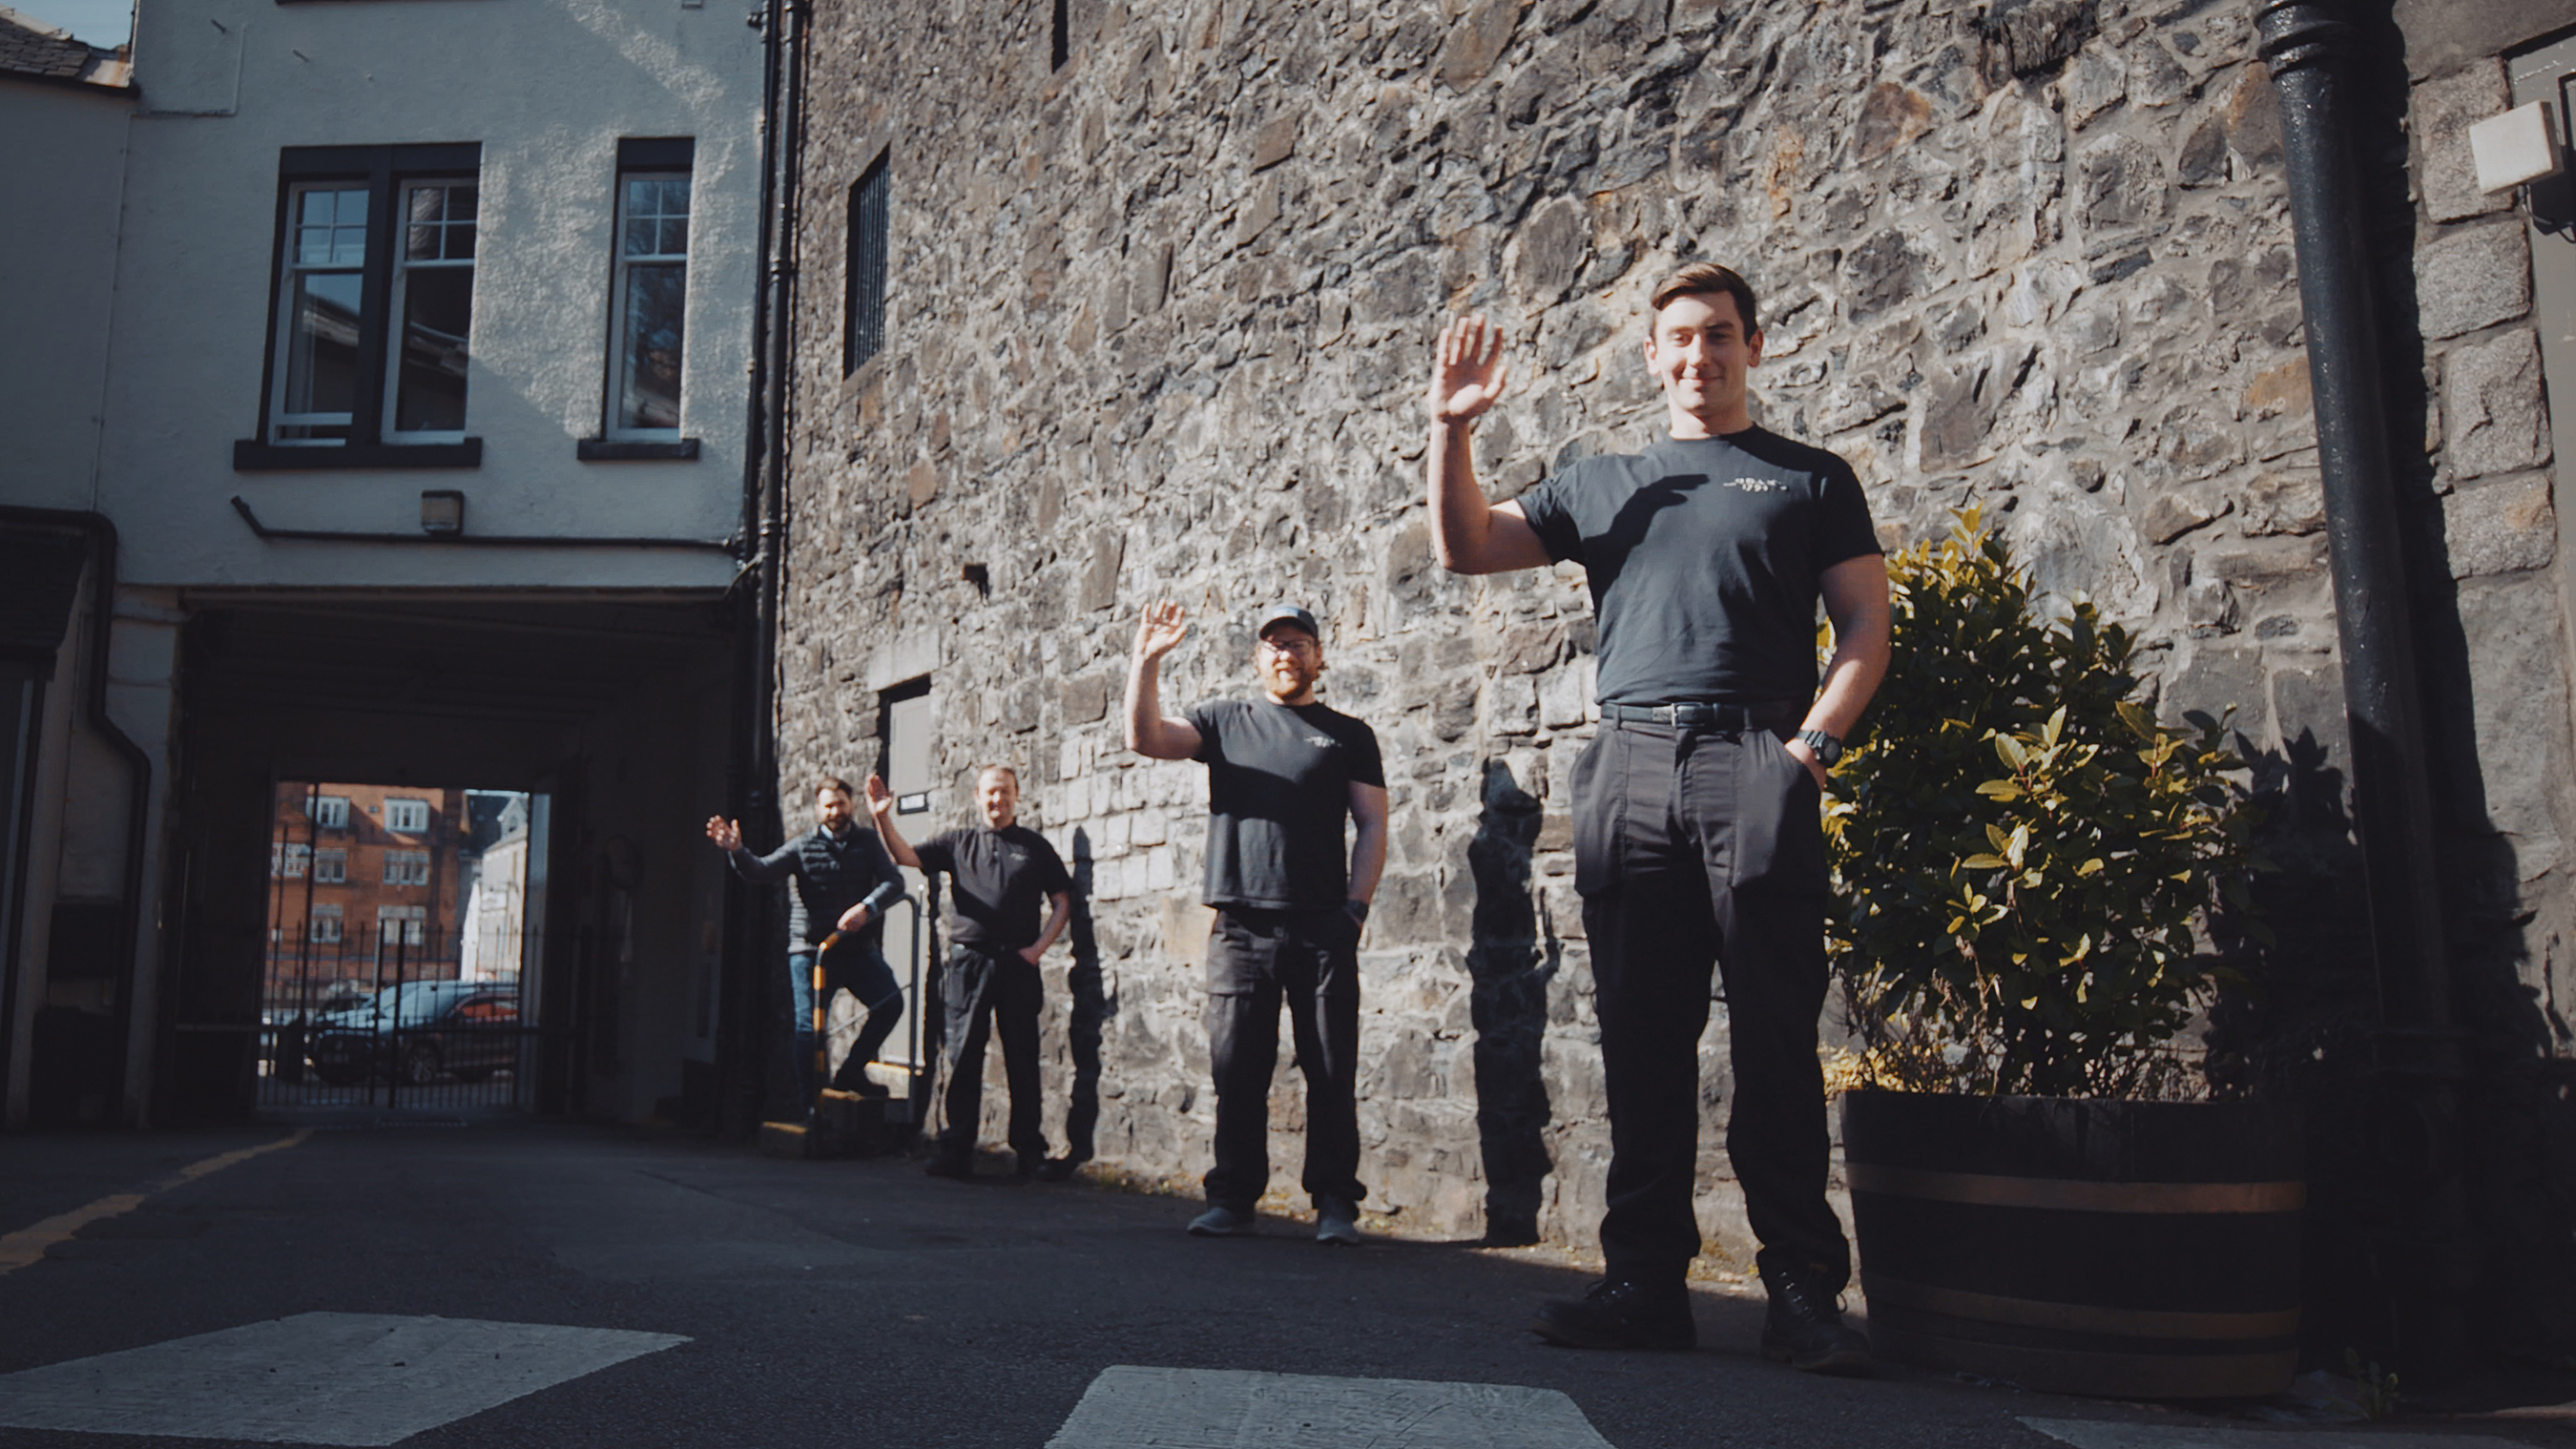 Founded in 1794, the Oban distillery produces incredibly smooth, hand-crafted Single Malt Scotch Whisky. Oban is made by only seven workers - meaning every drop of whisky is made by 14 hands.